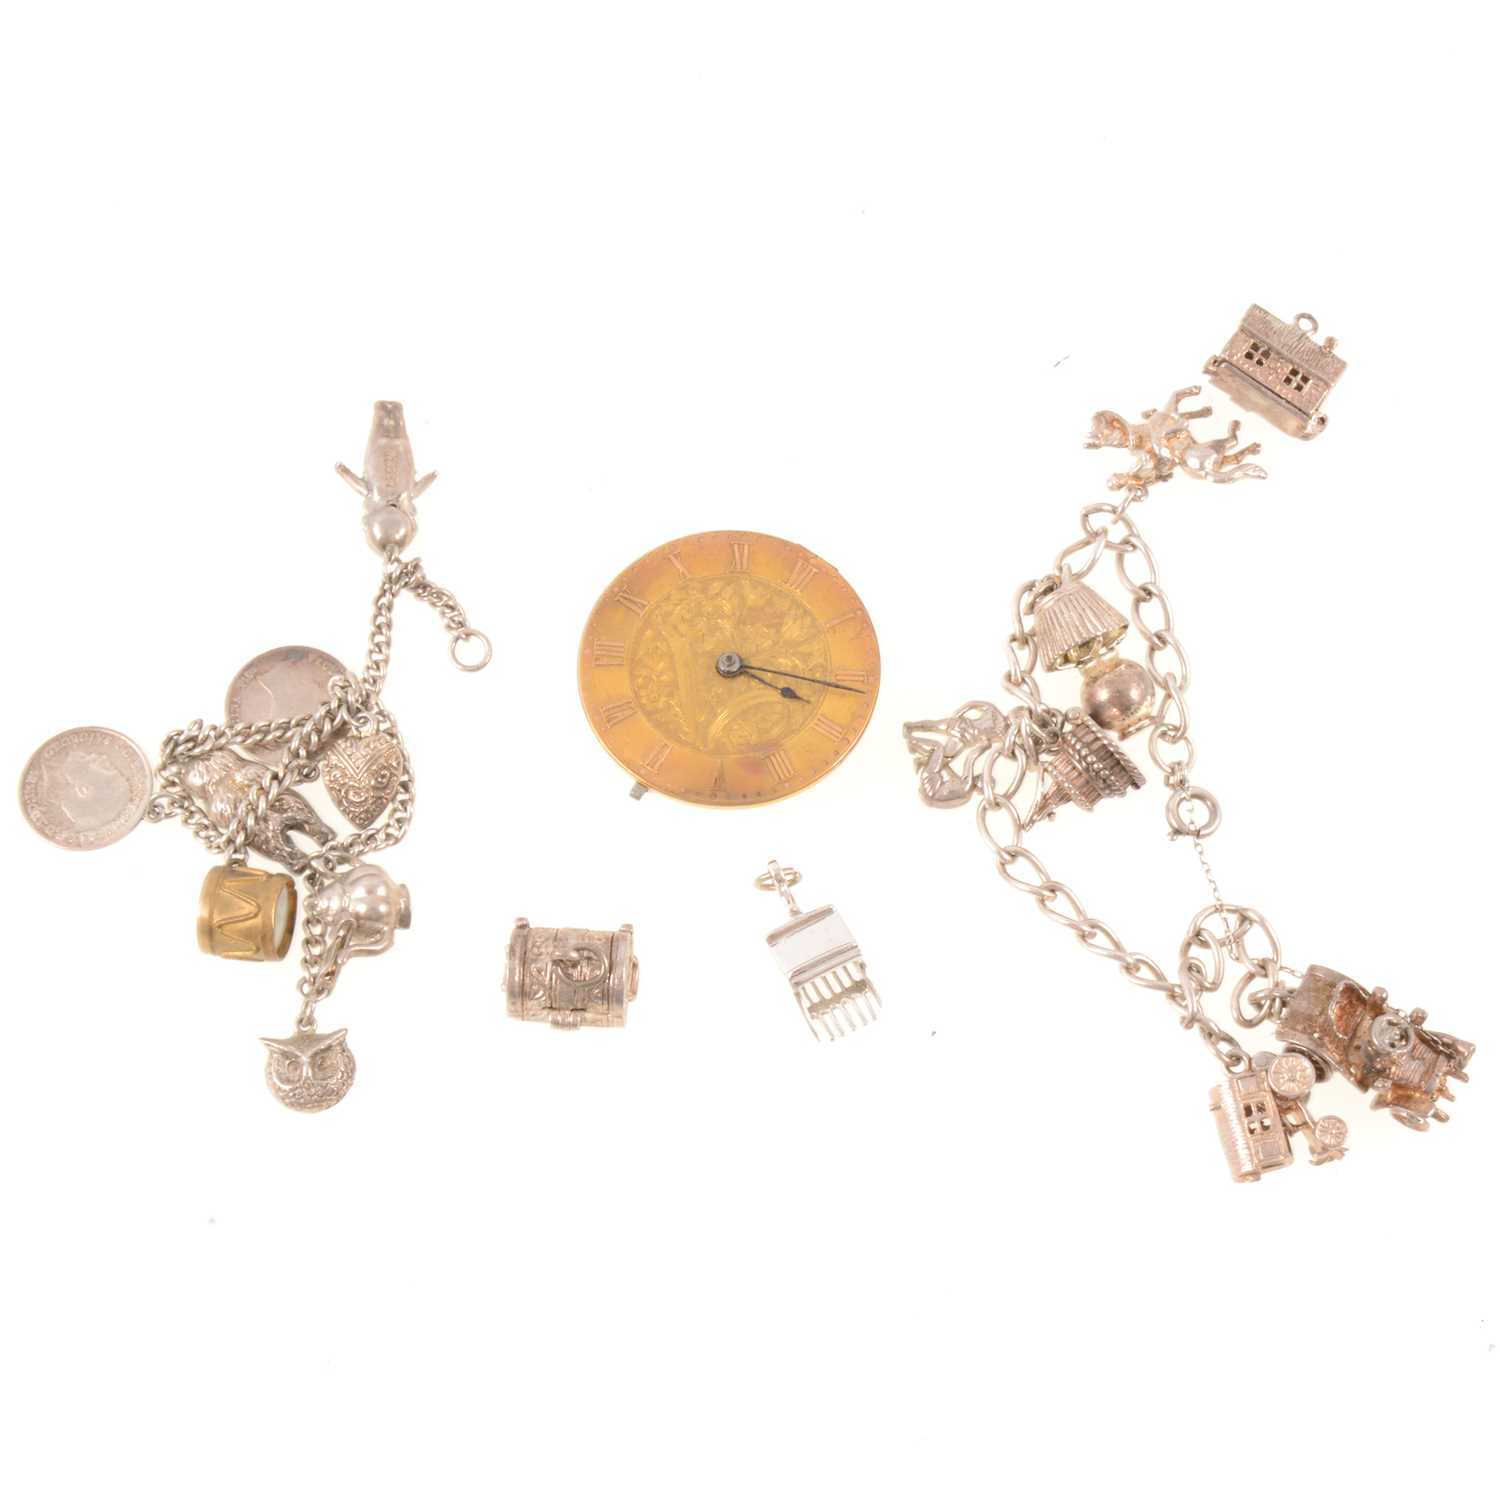 Lot 146 - White metal charm bracelet, other metal charms and a pocket watch mechanism.